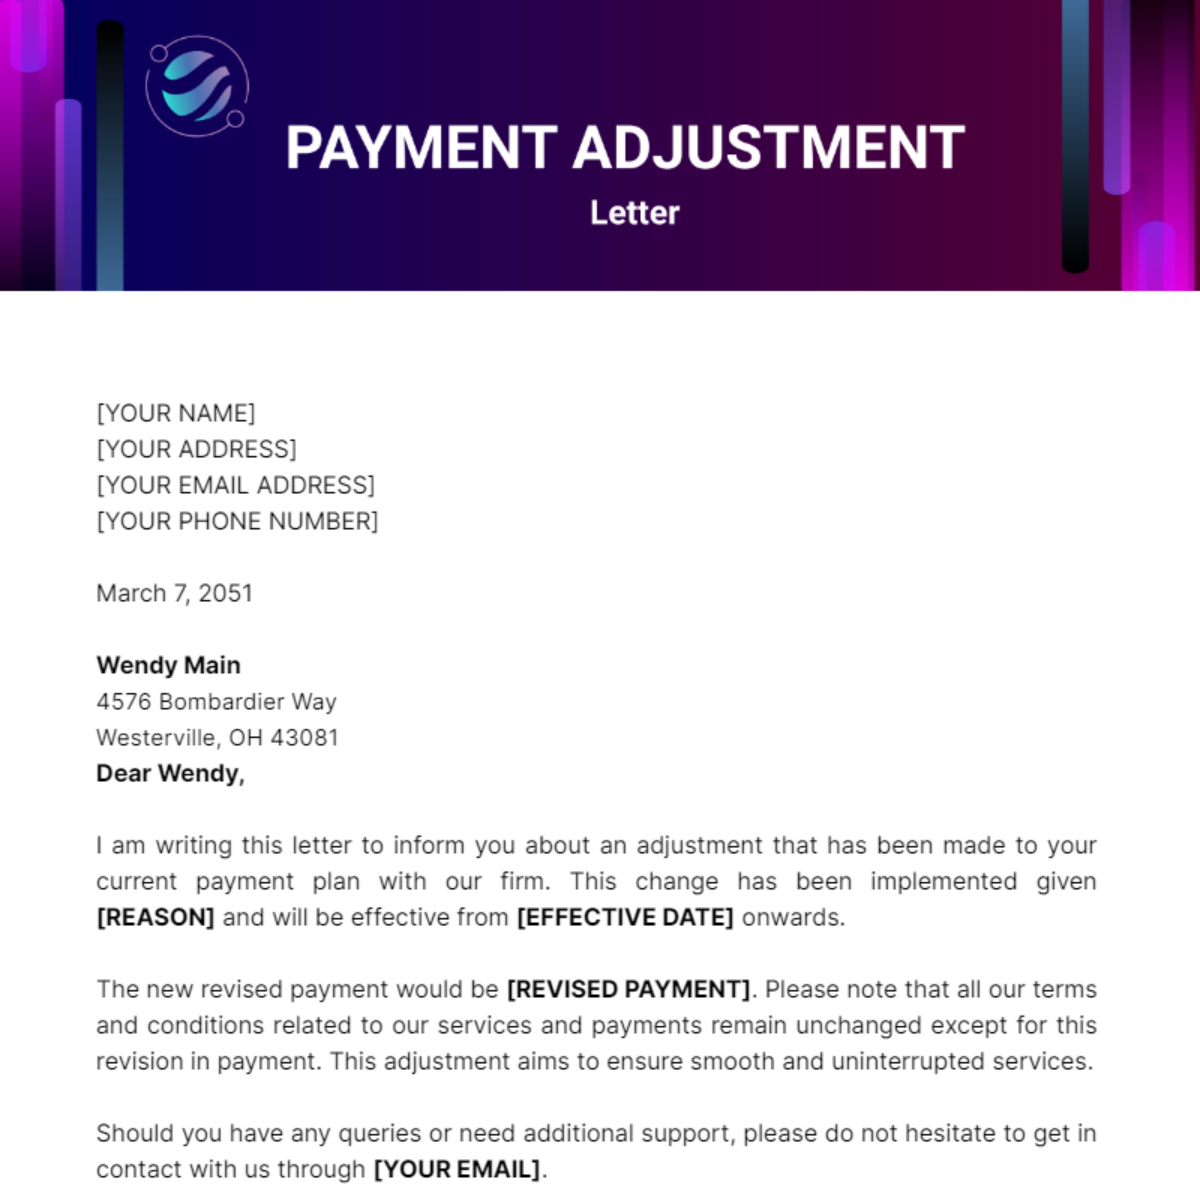 Payment Adjustment Letter Template